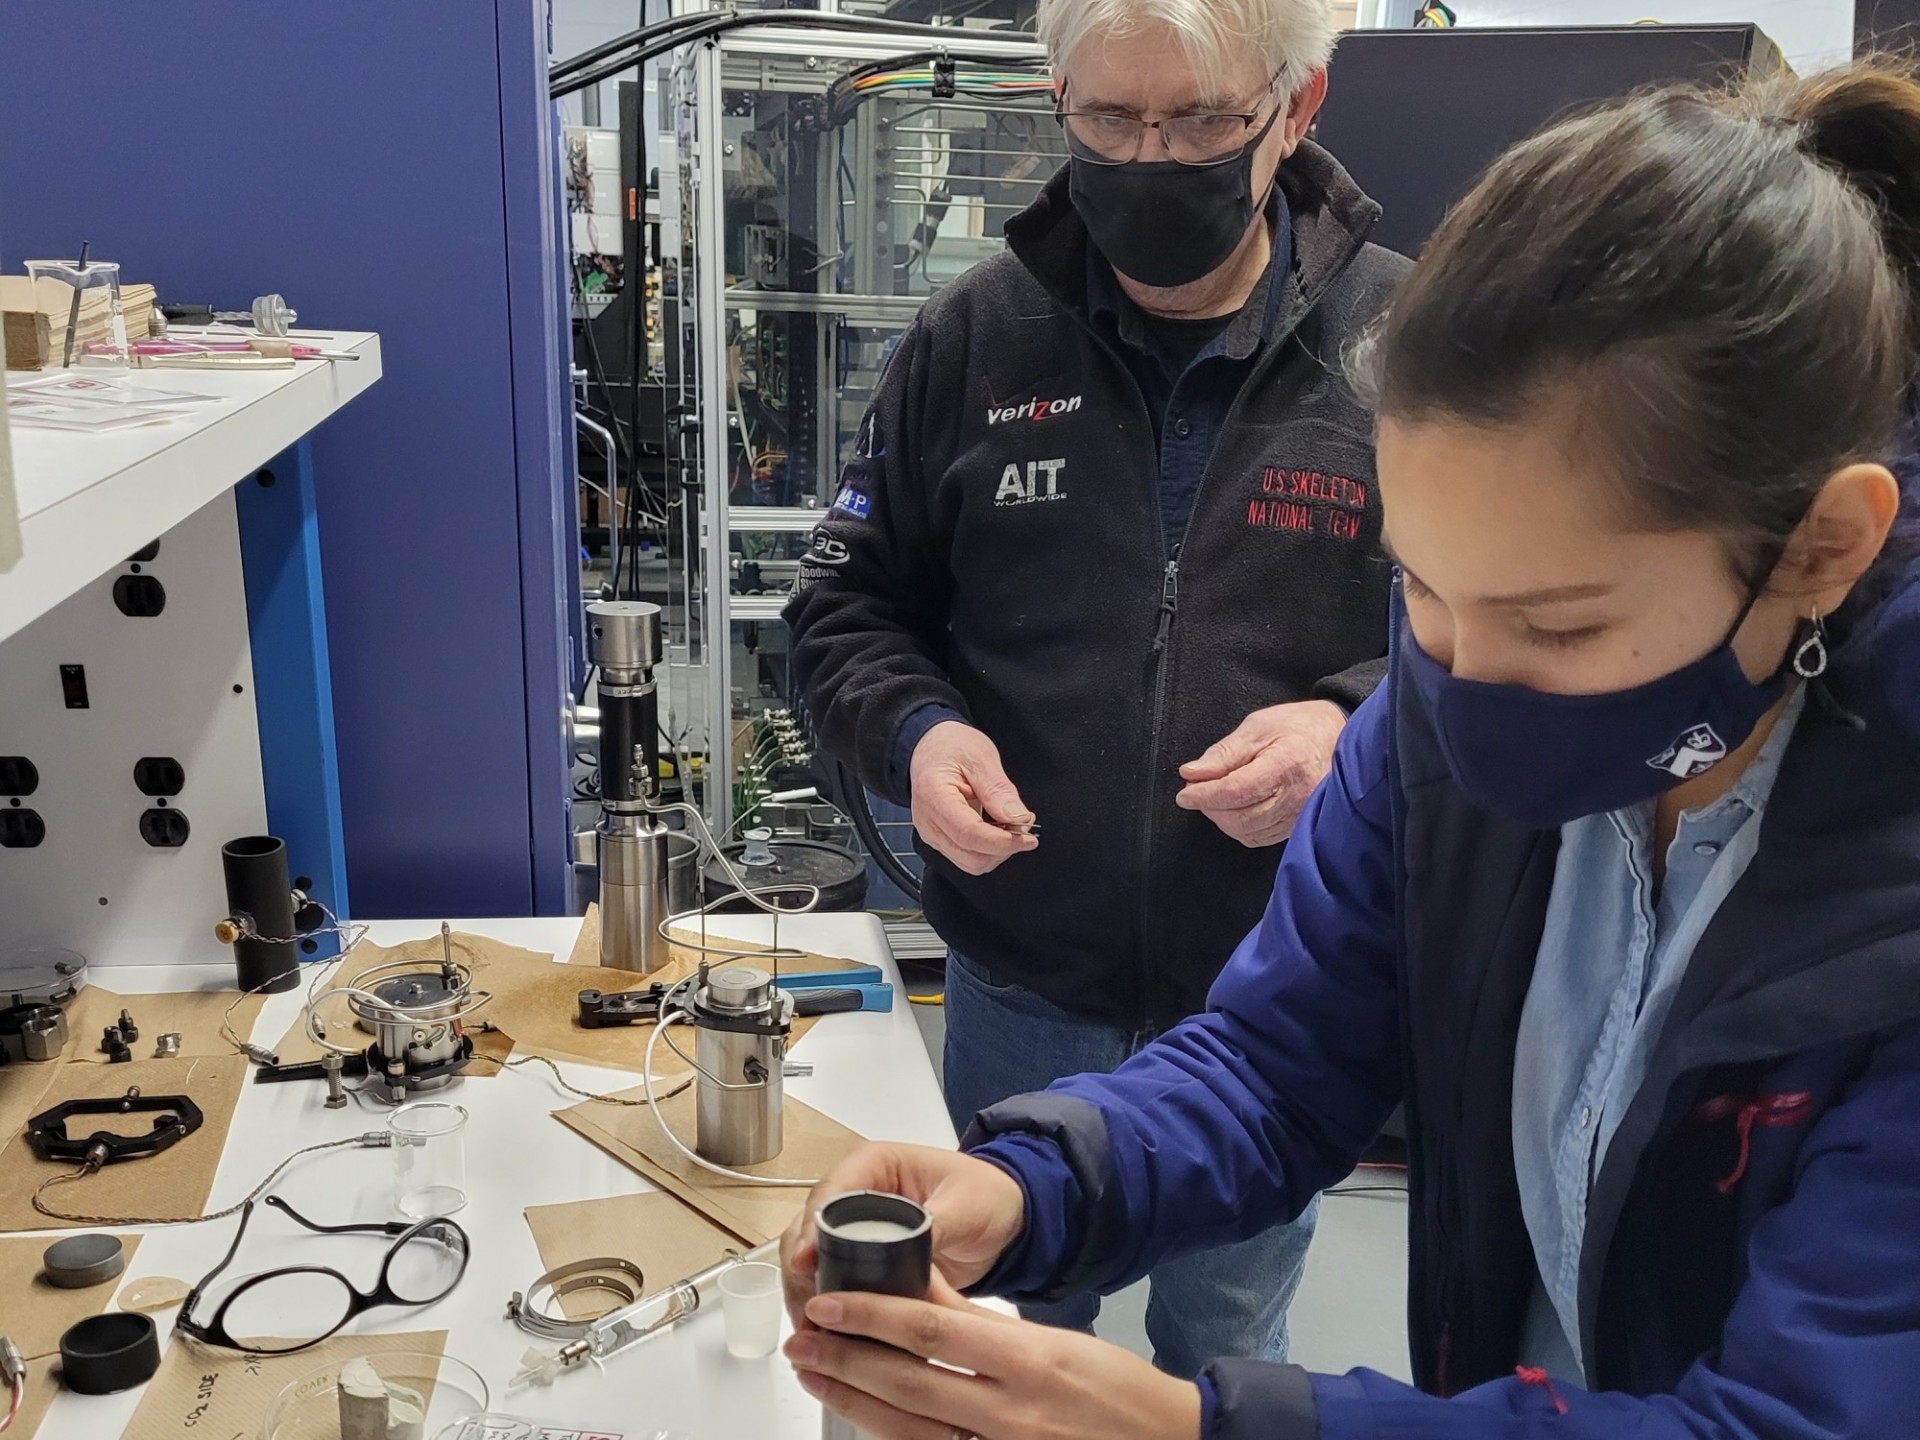 Catalina Sanchez-Roa prepares a sample for the triaxial apparatus while Ted Koczynski looks on (2021).